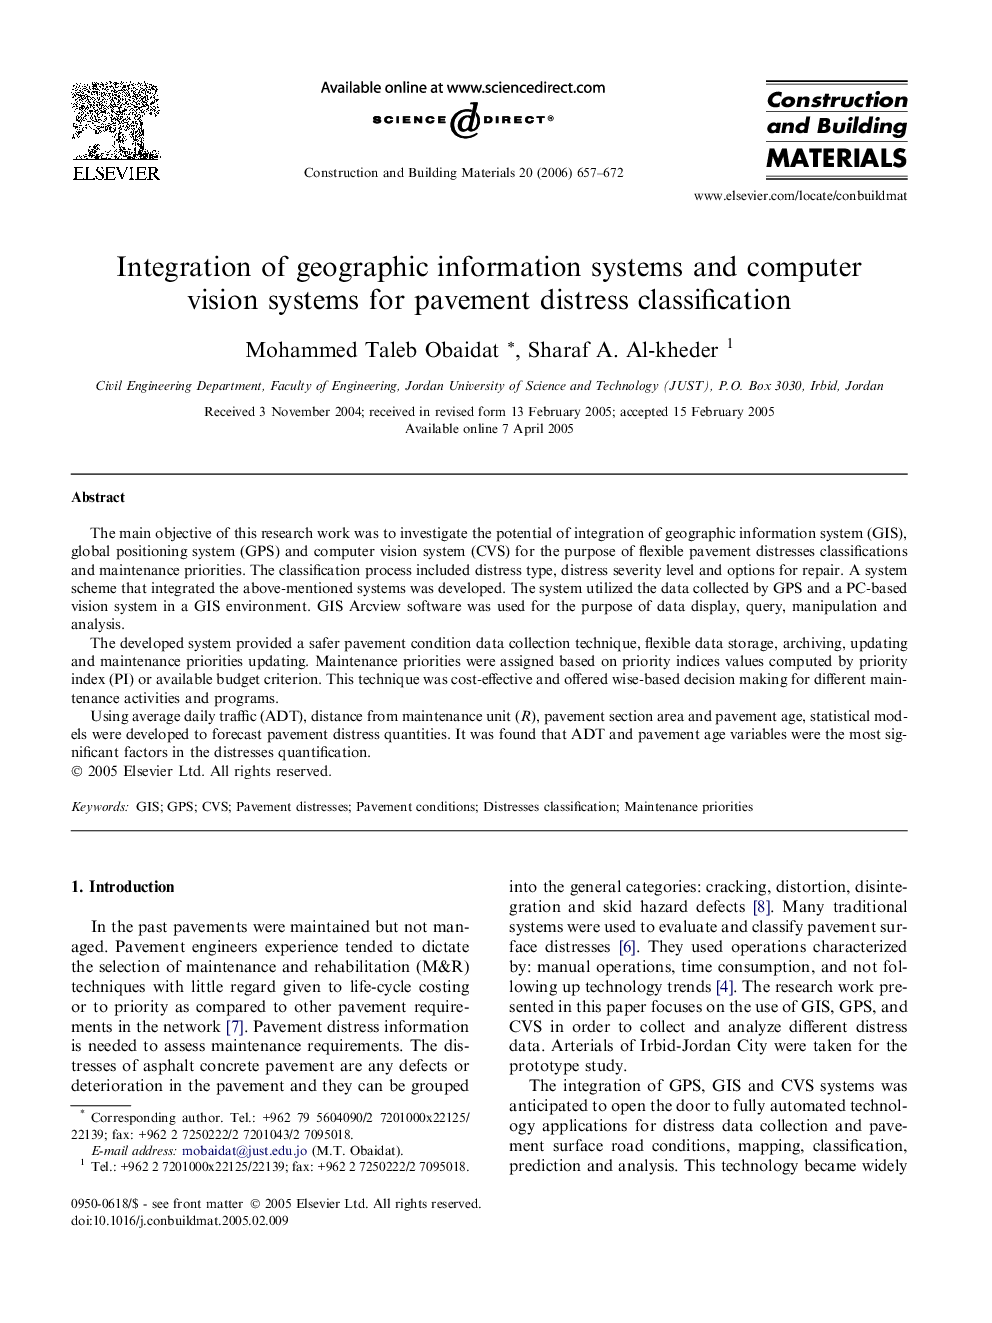 Integration of geographic information systems and computer vision systems for pavement distress classification